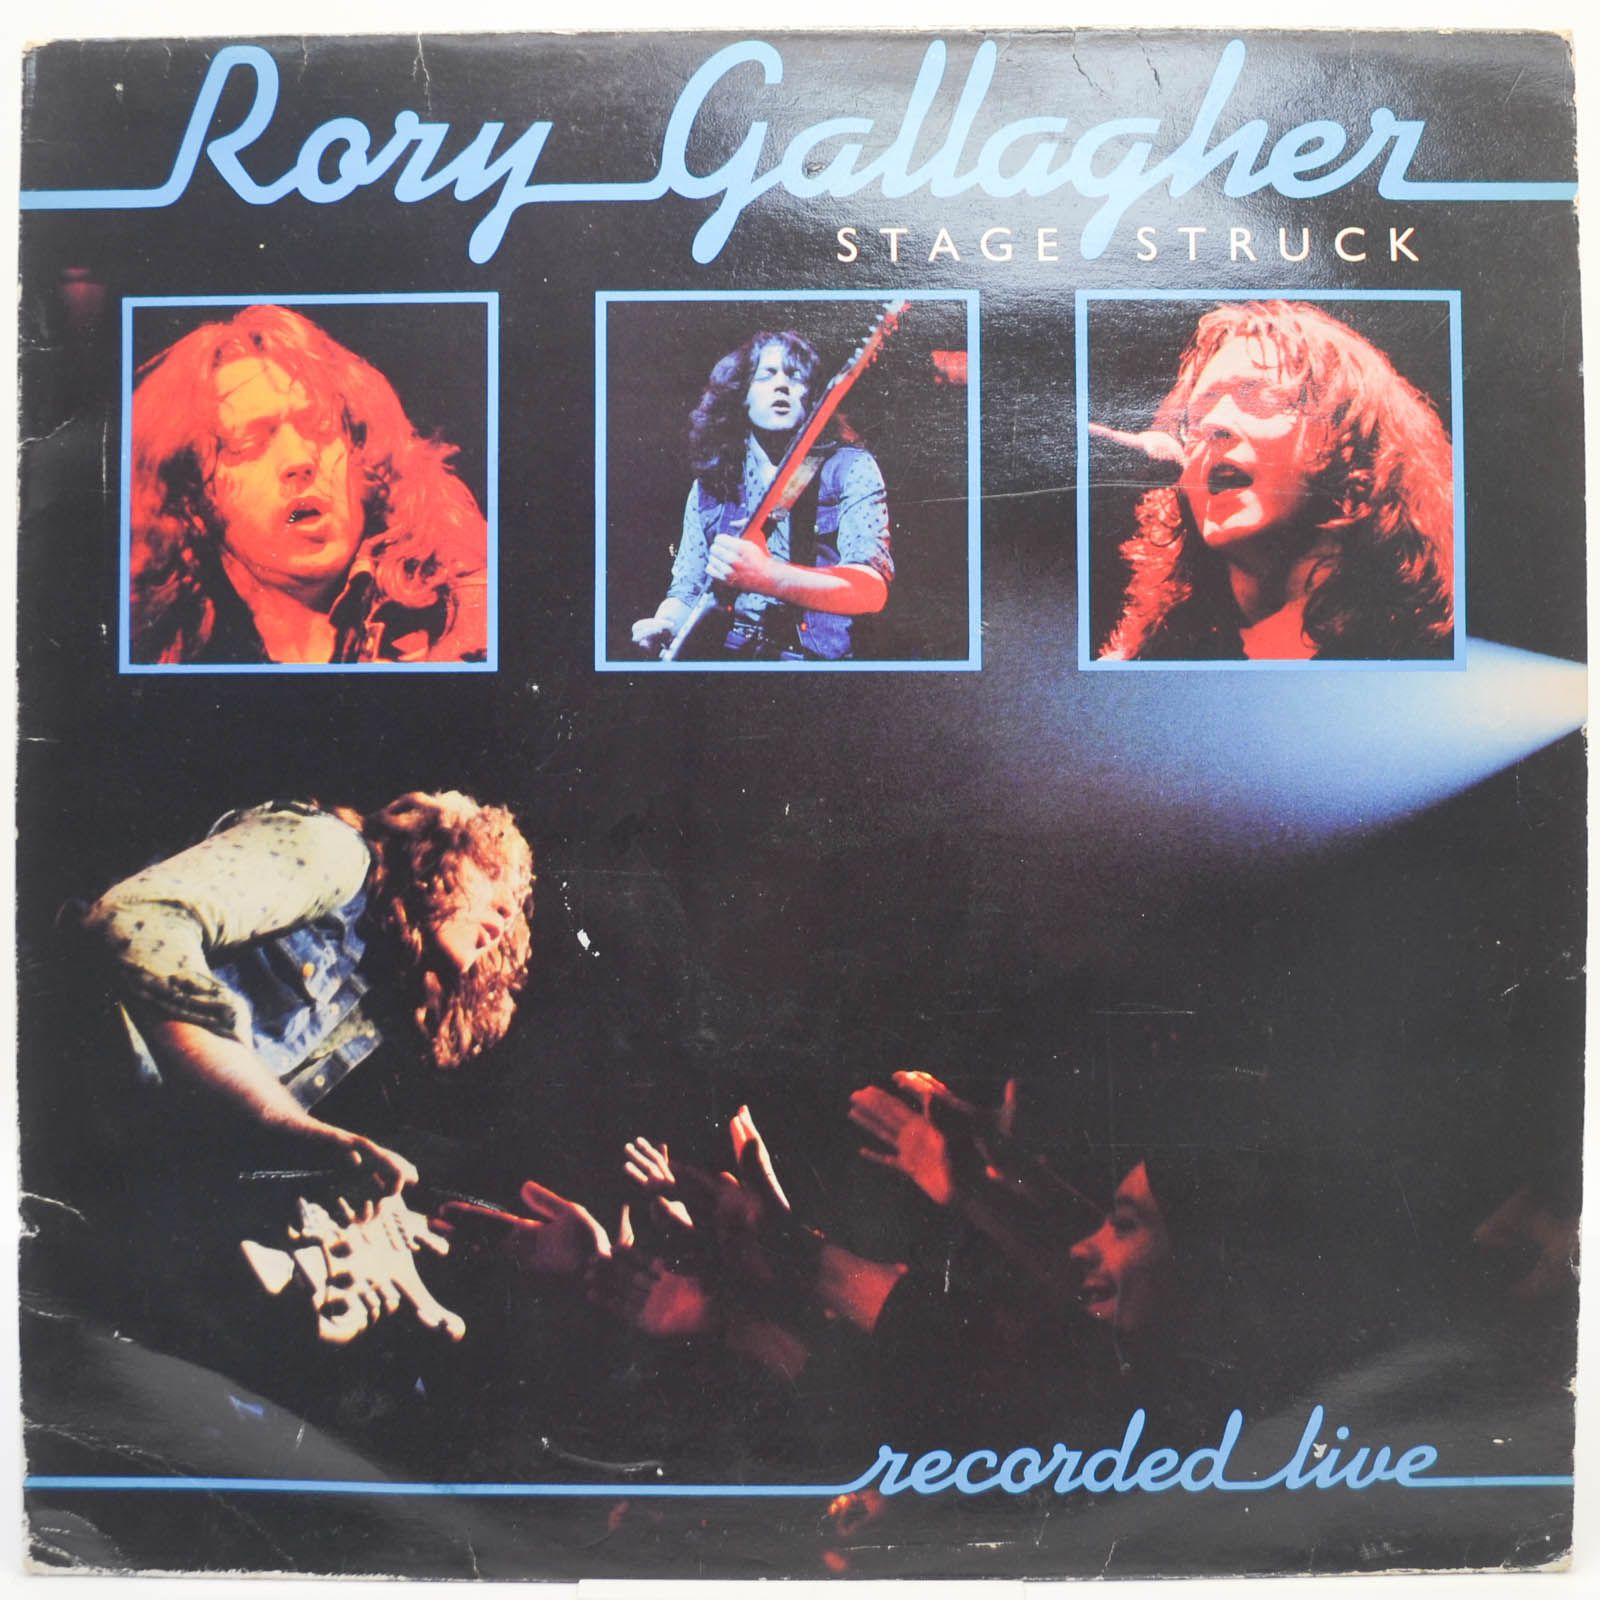 Rory Gallagher — Stage Struck (1-st, UK), 1980